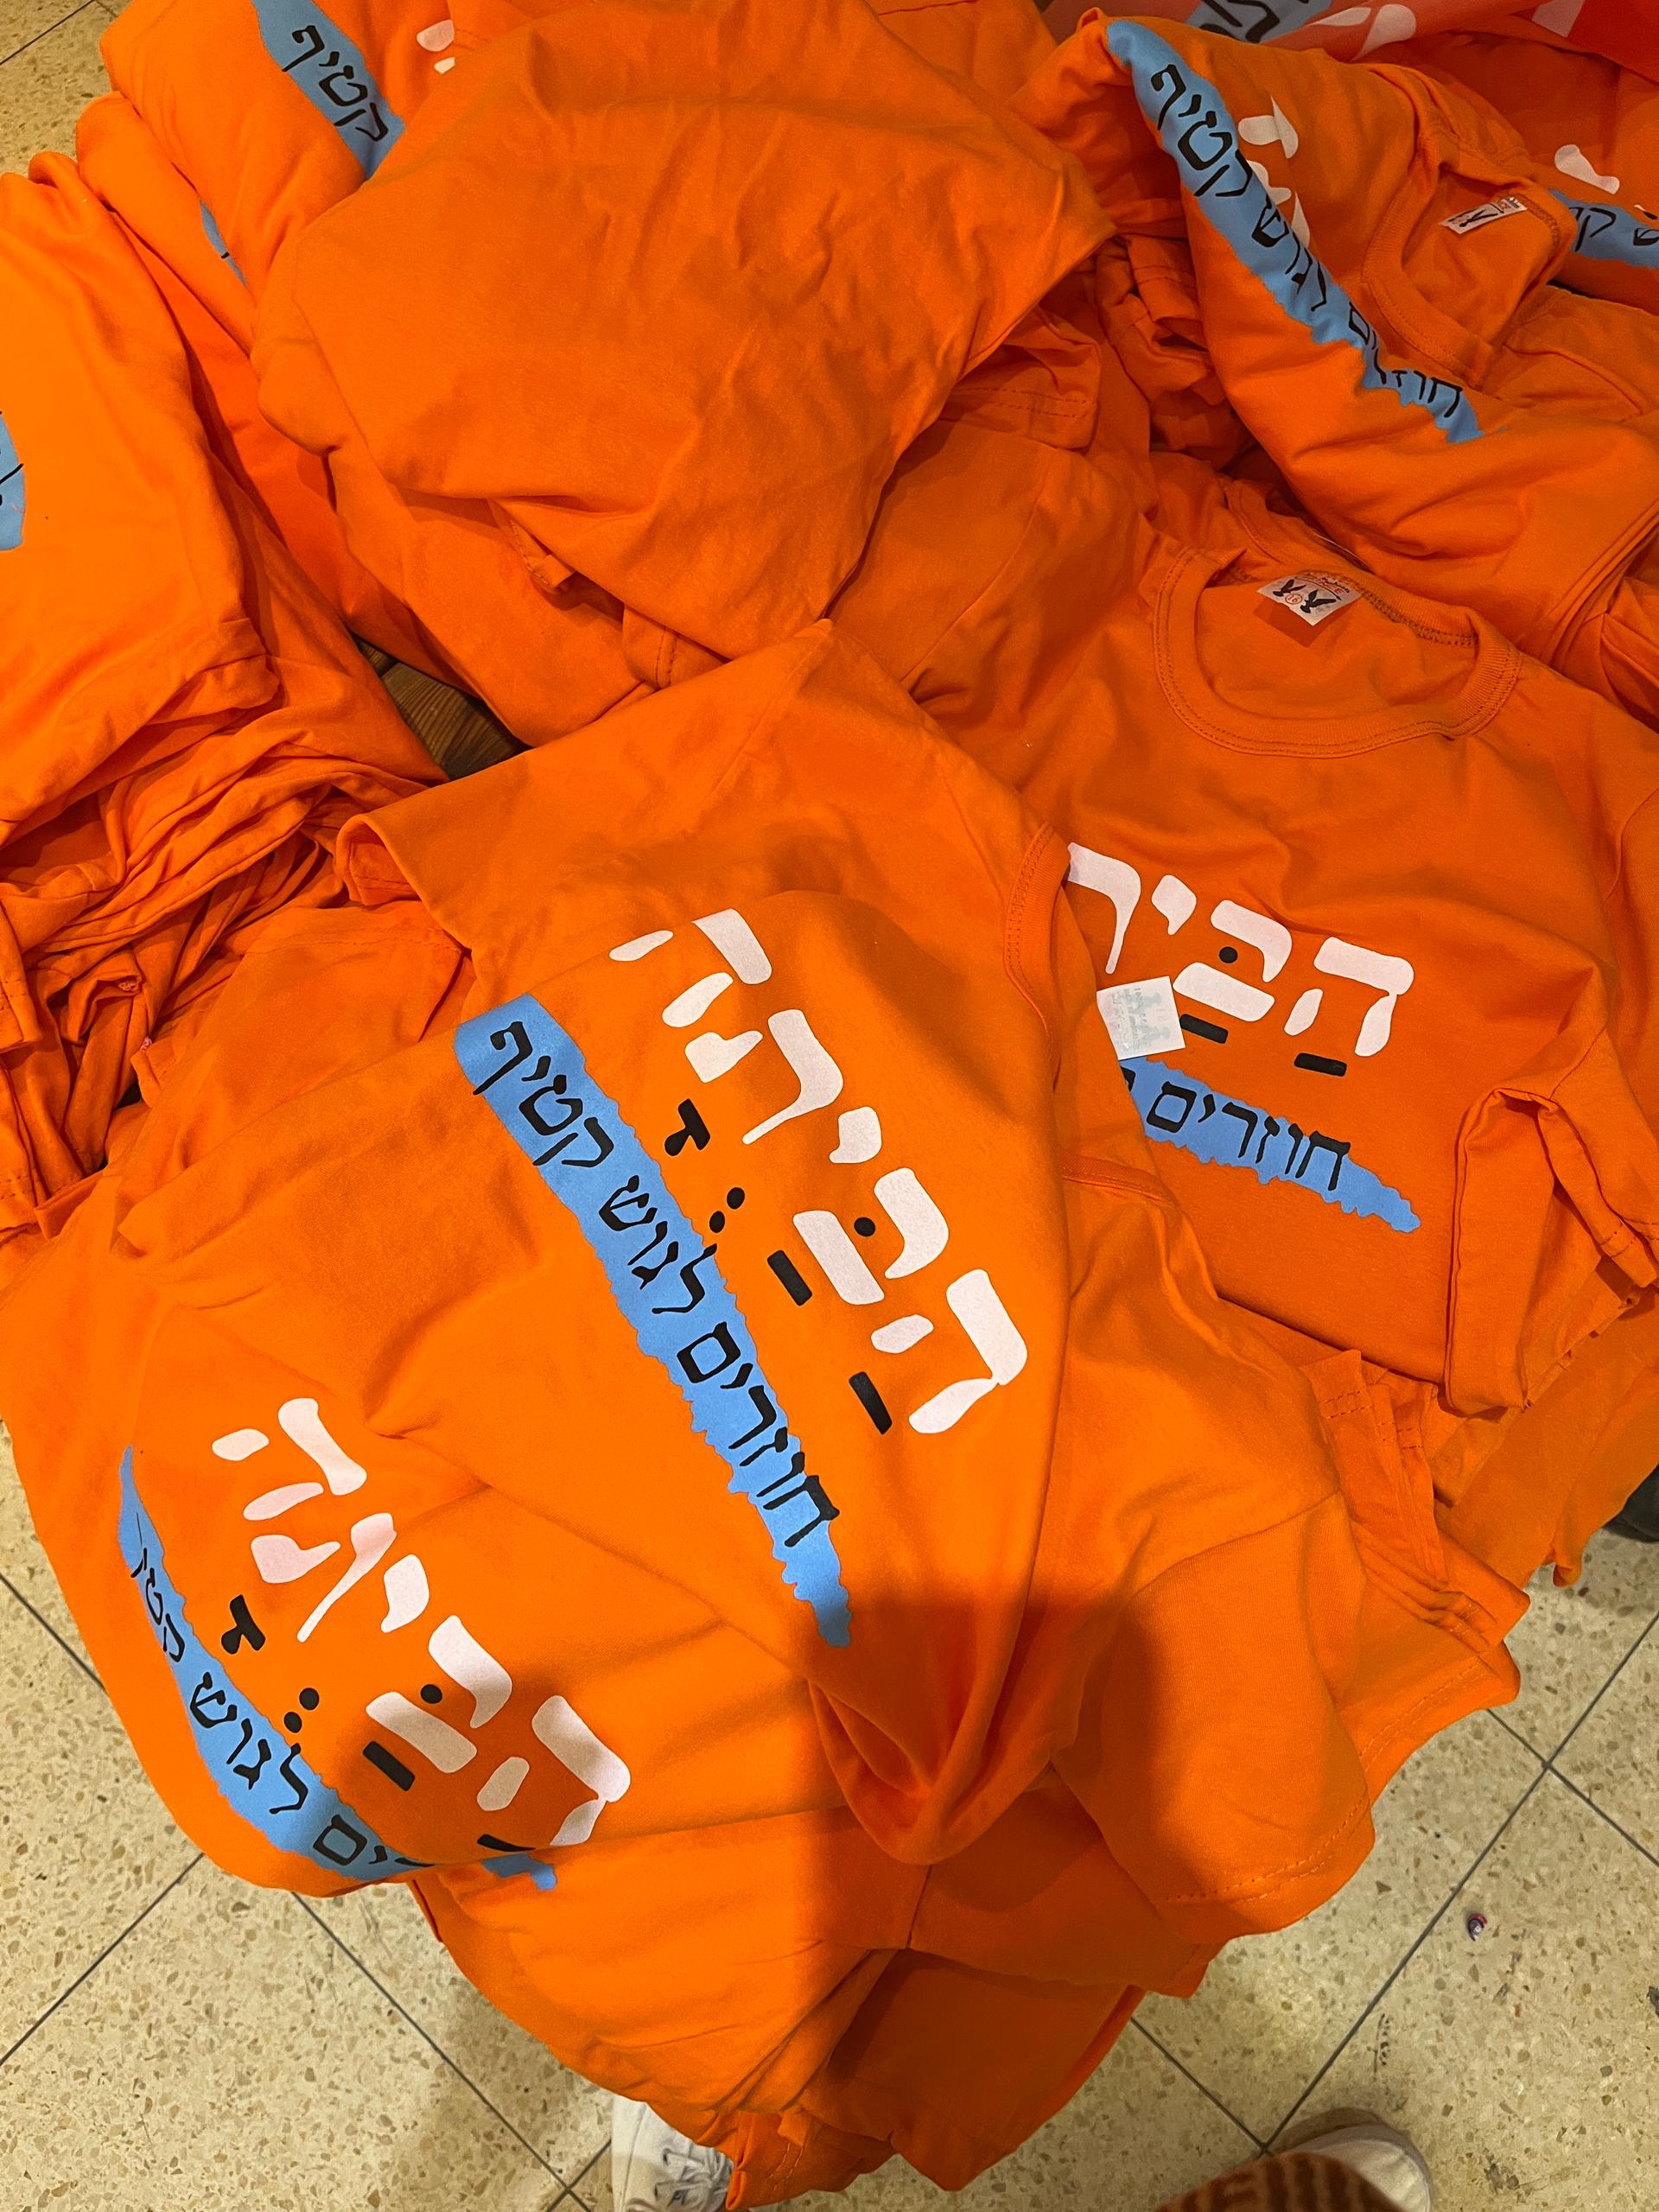 Orange T-shirts stacked in a messy pile with Israeli language written on them